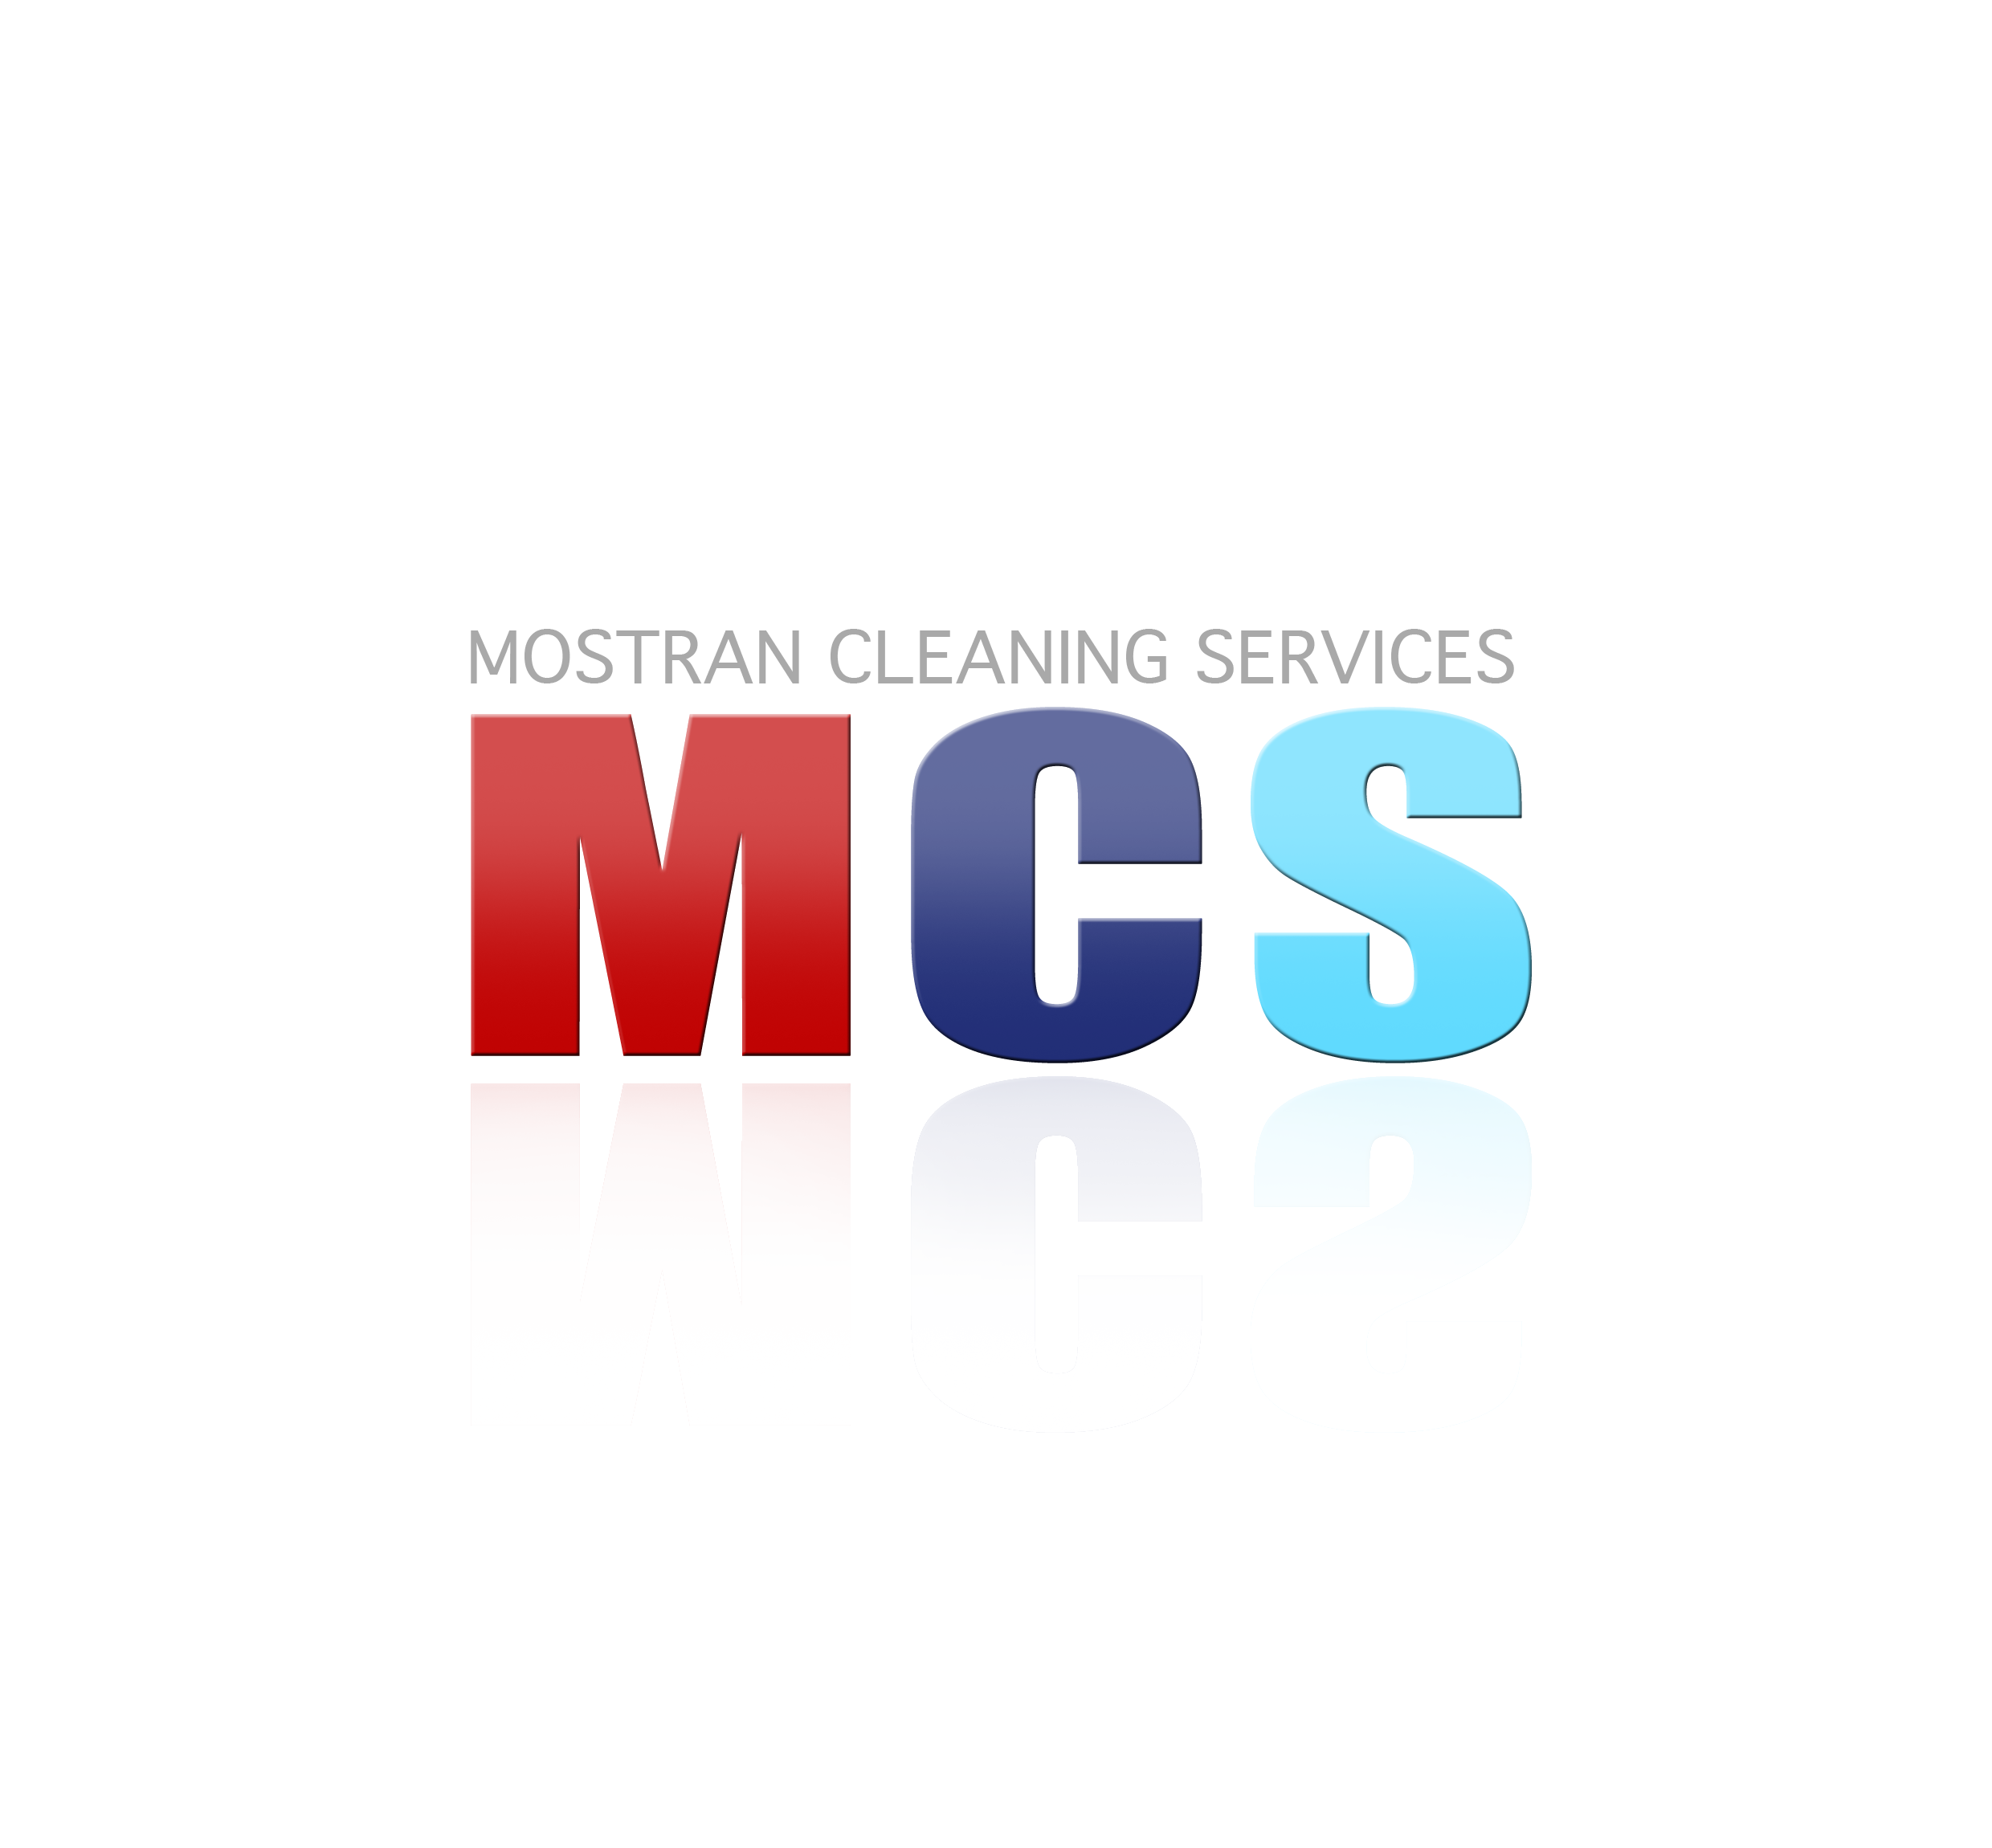 Mostran Cleaning Services Ltd